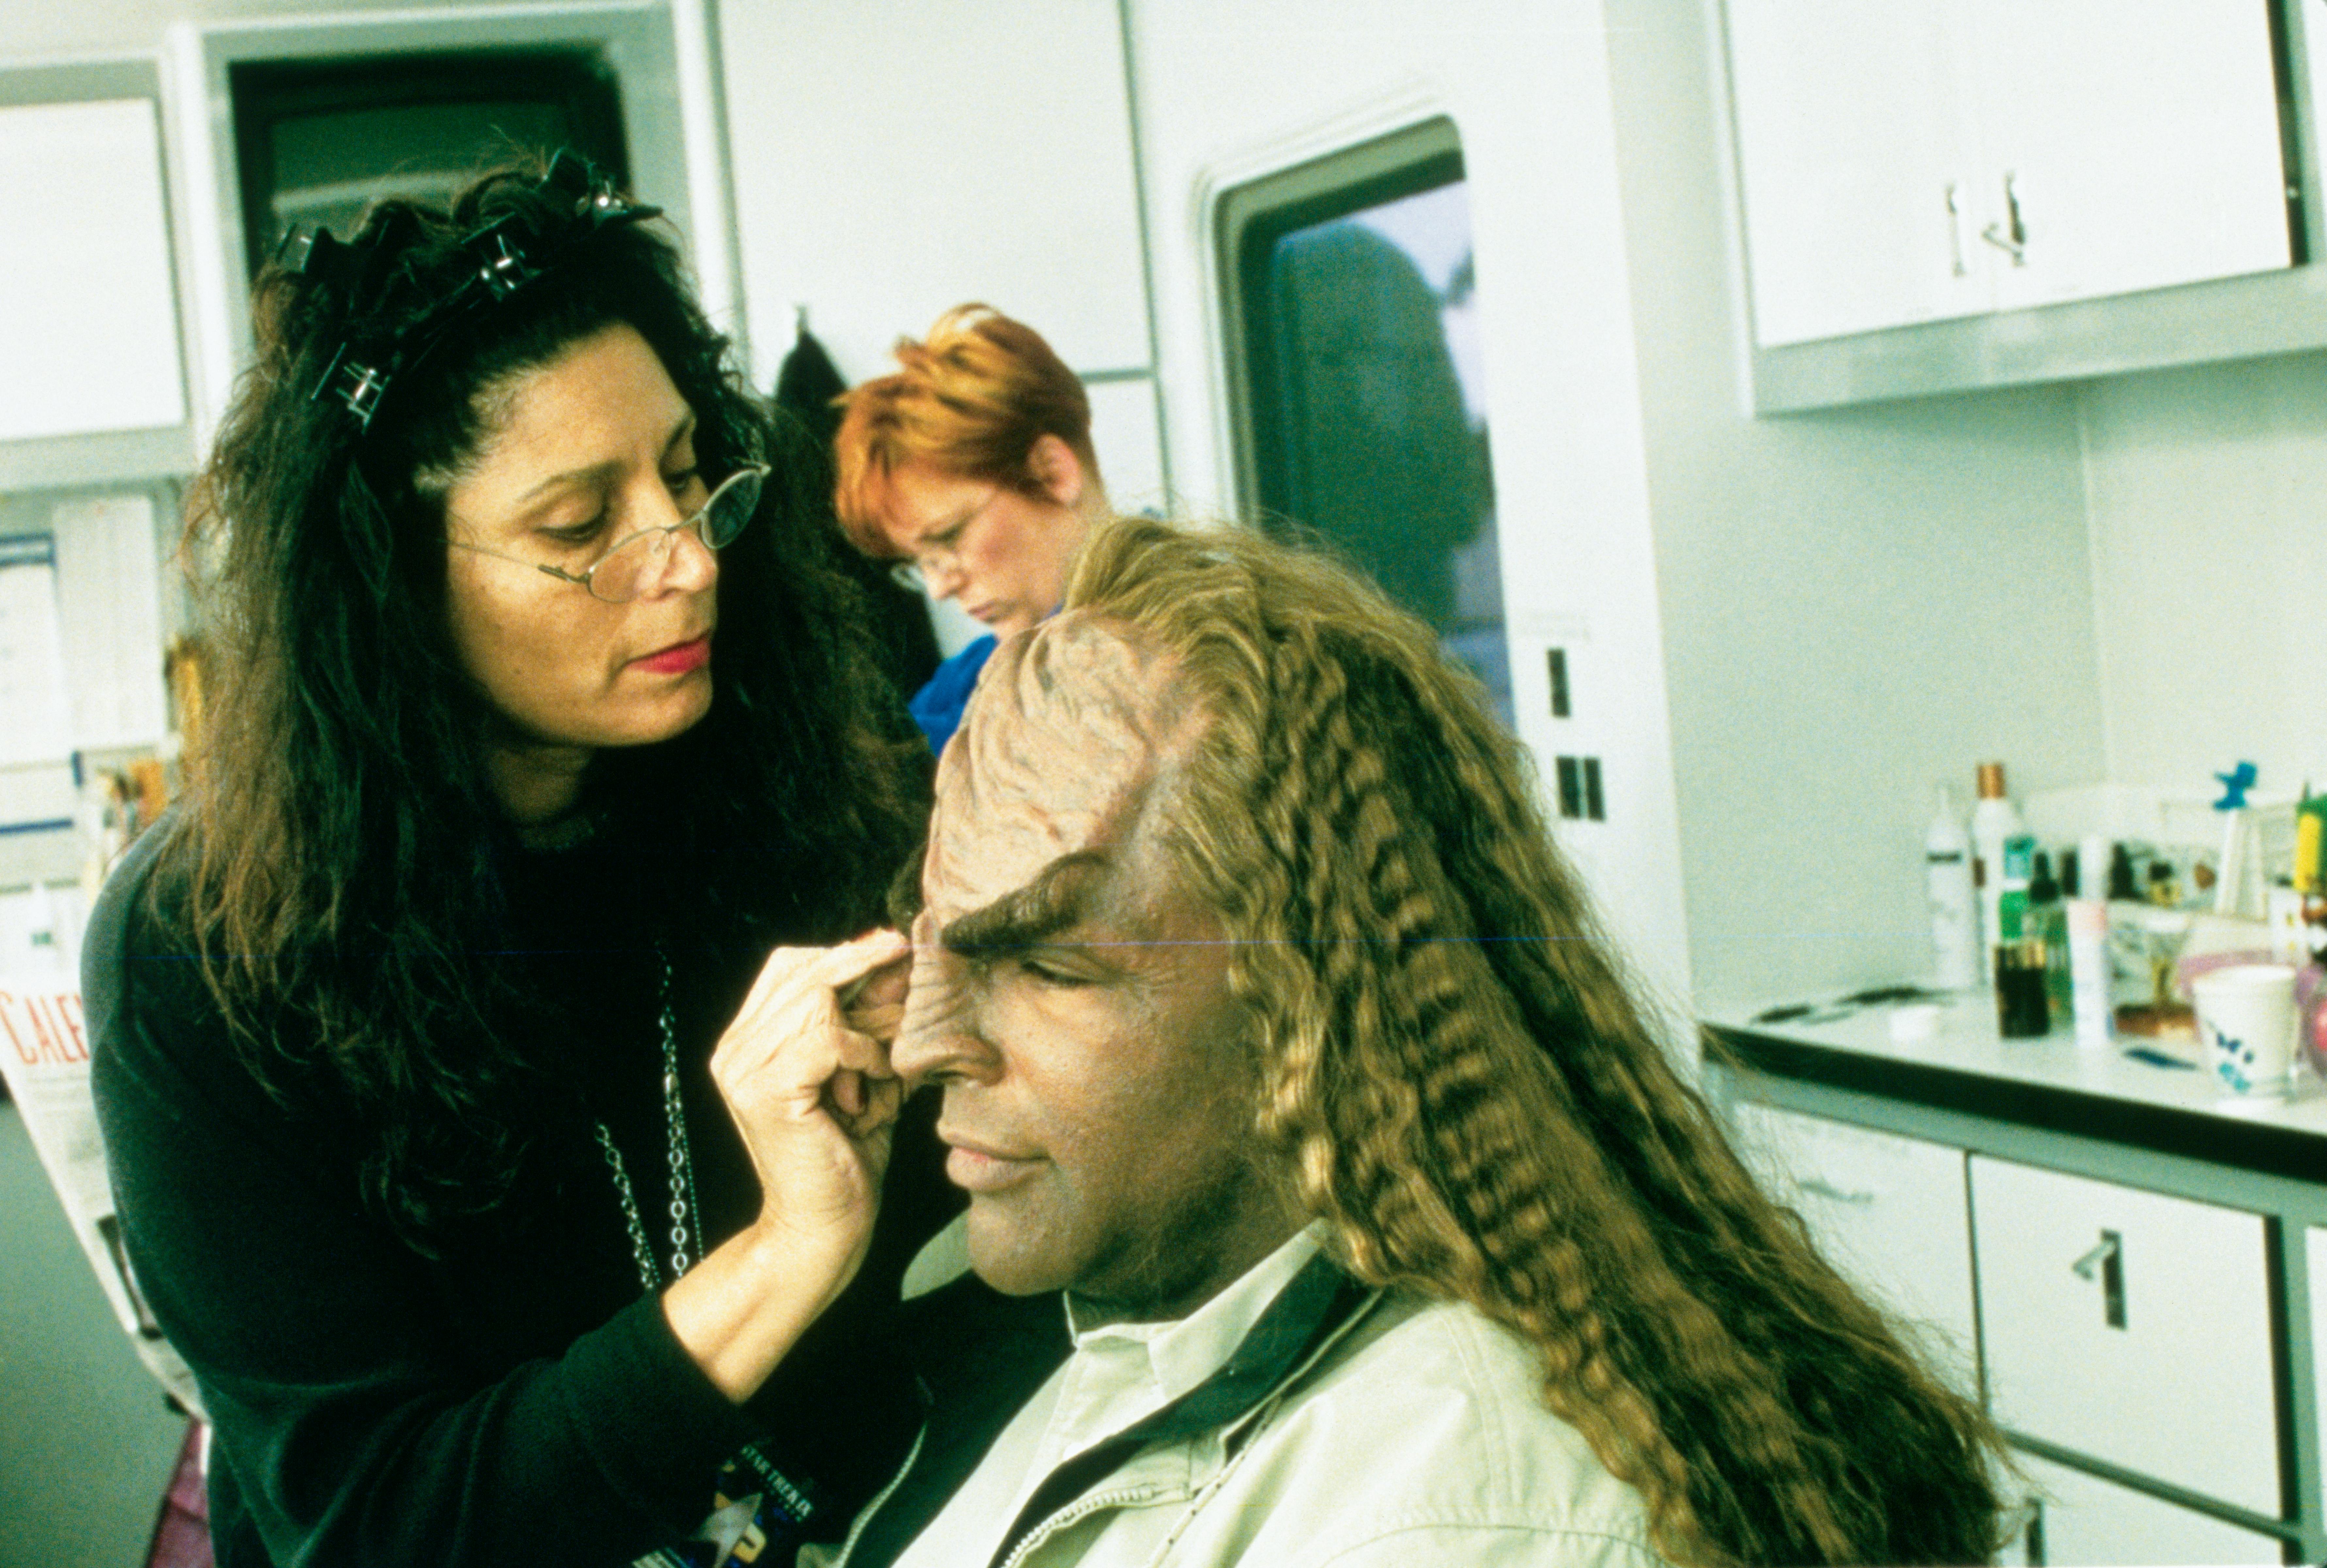 In the make-up trailer putting final touches on Michael Dorn on set for Star Trek: Insurrection